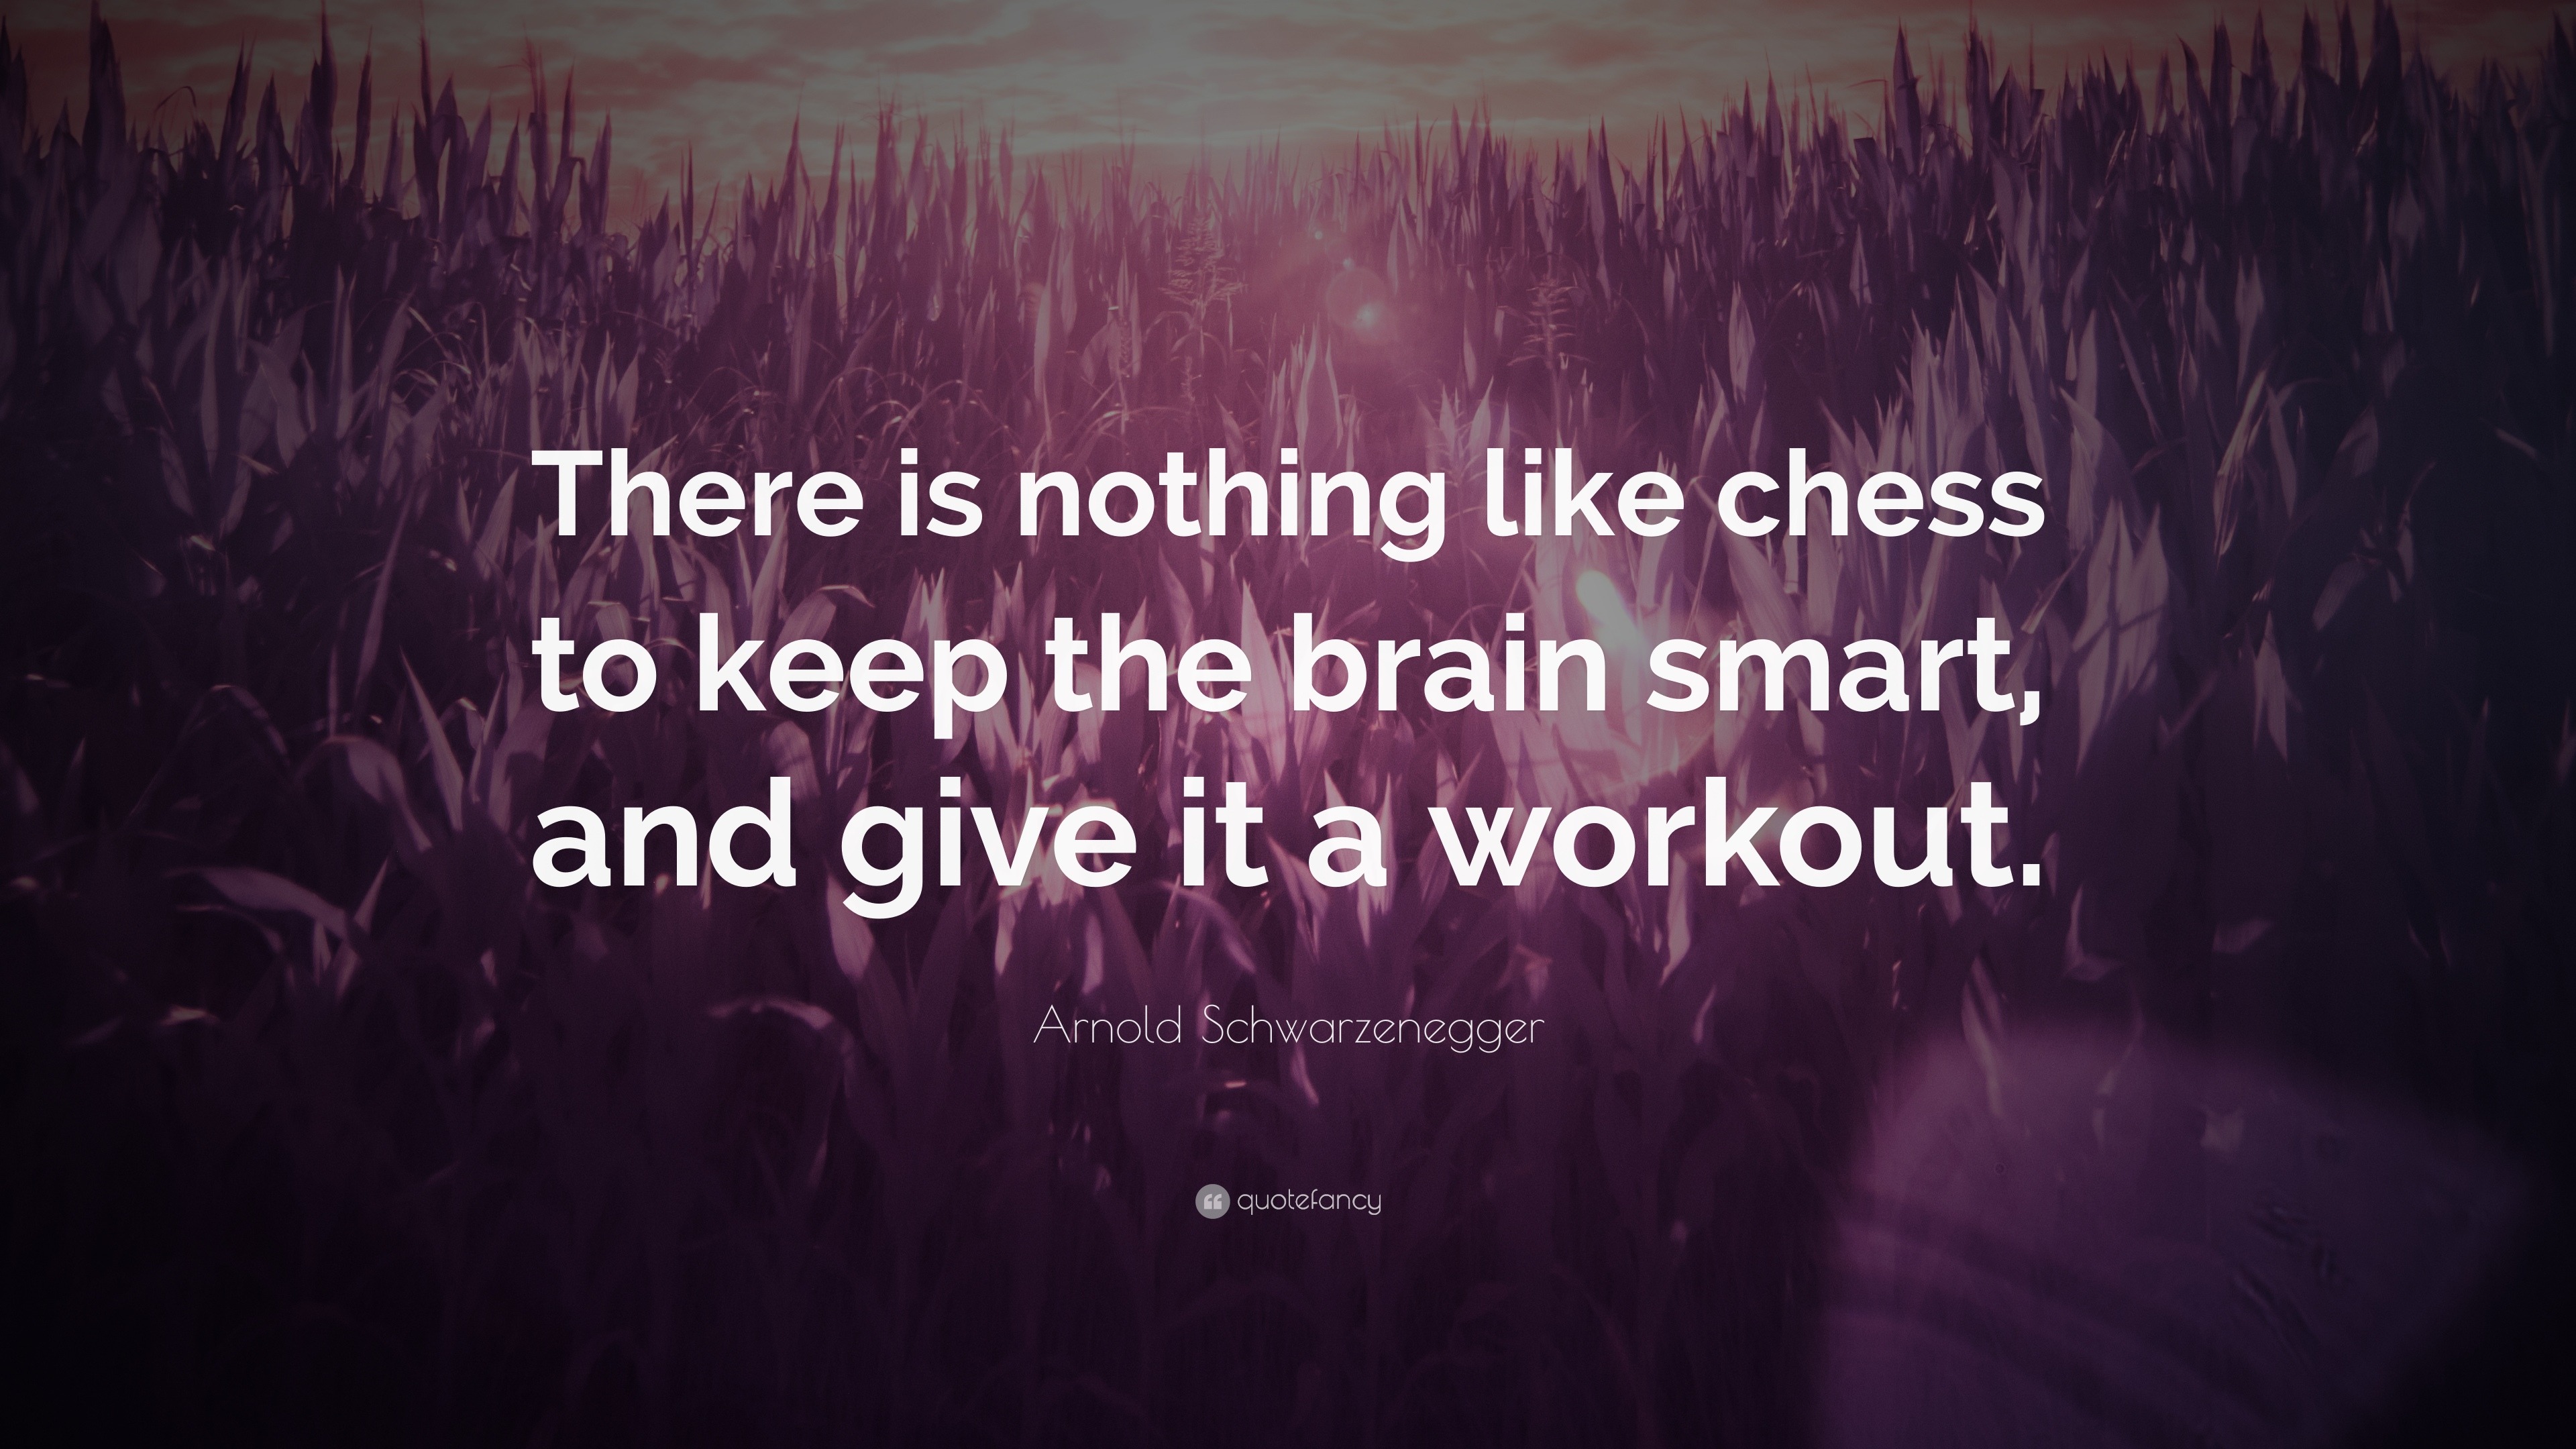 Arnold Schwarzenegger Quote “There is nothing like chess to keep the brain smart